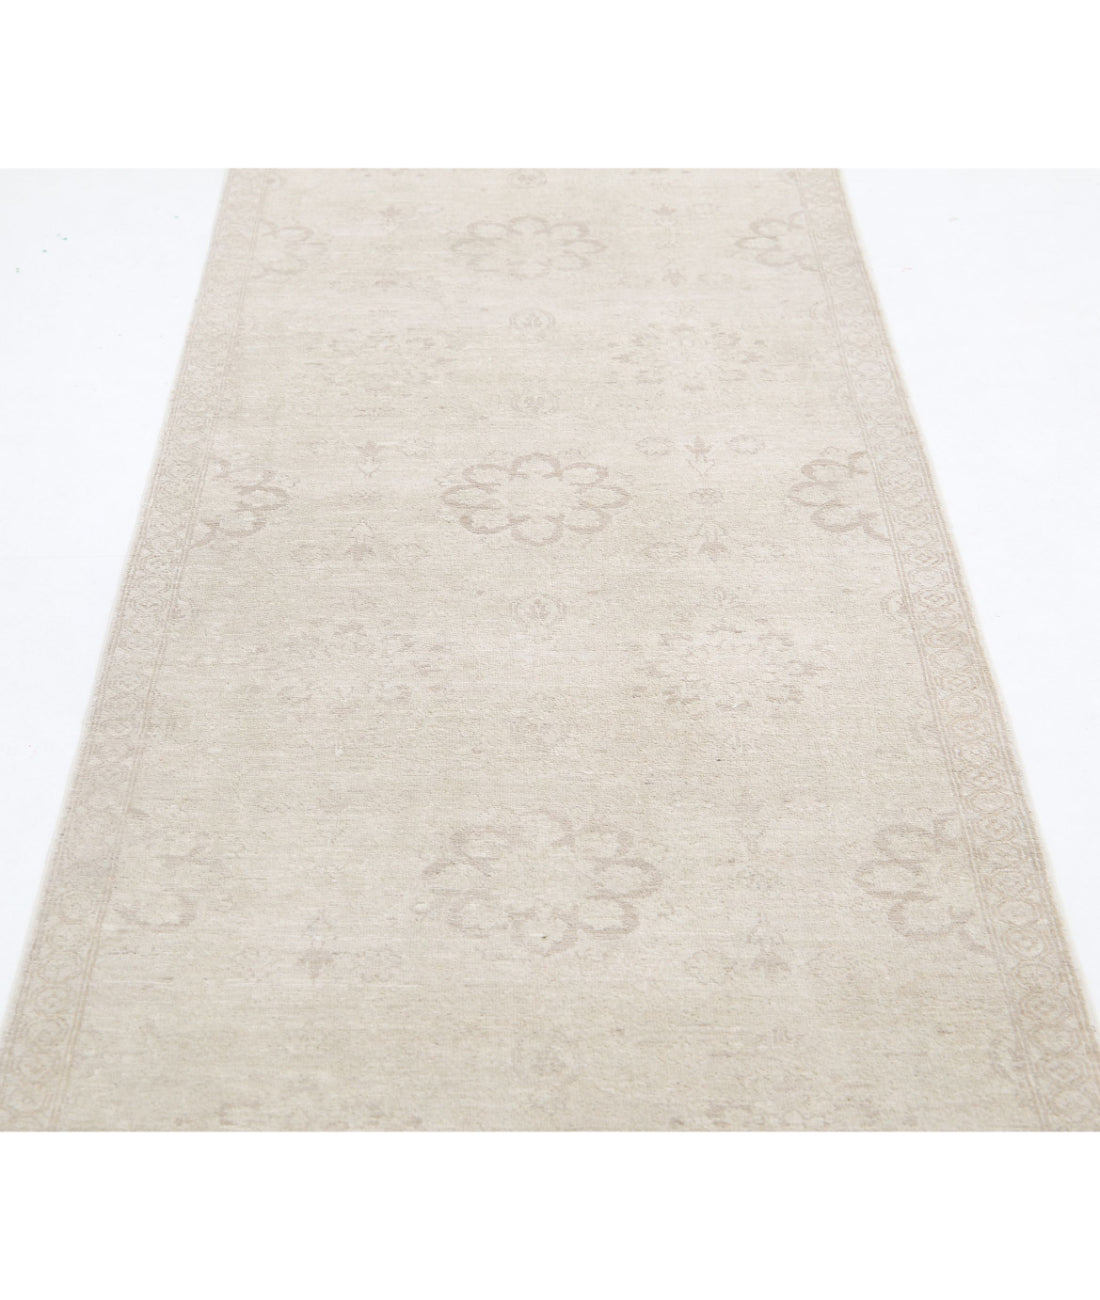 Serenity 3'0'' X 9'10'' Hand-Knotted Wool Rug 3'0'' x 9'10'' (90 X 295) / Ivory / Grey